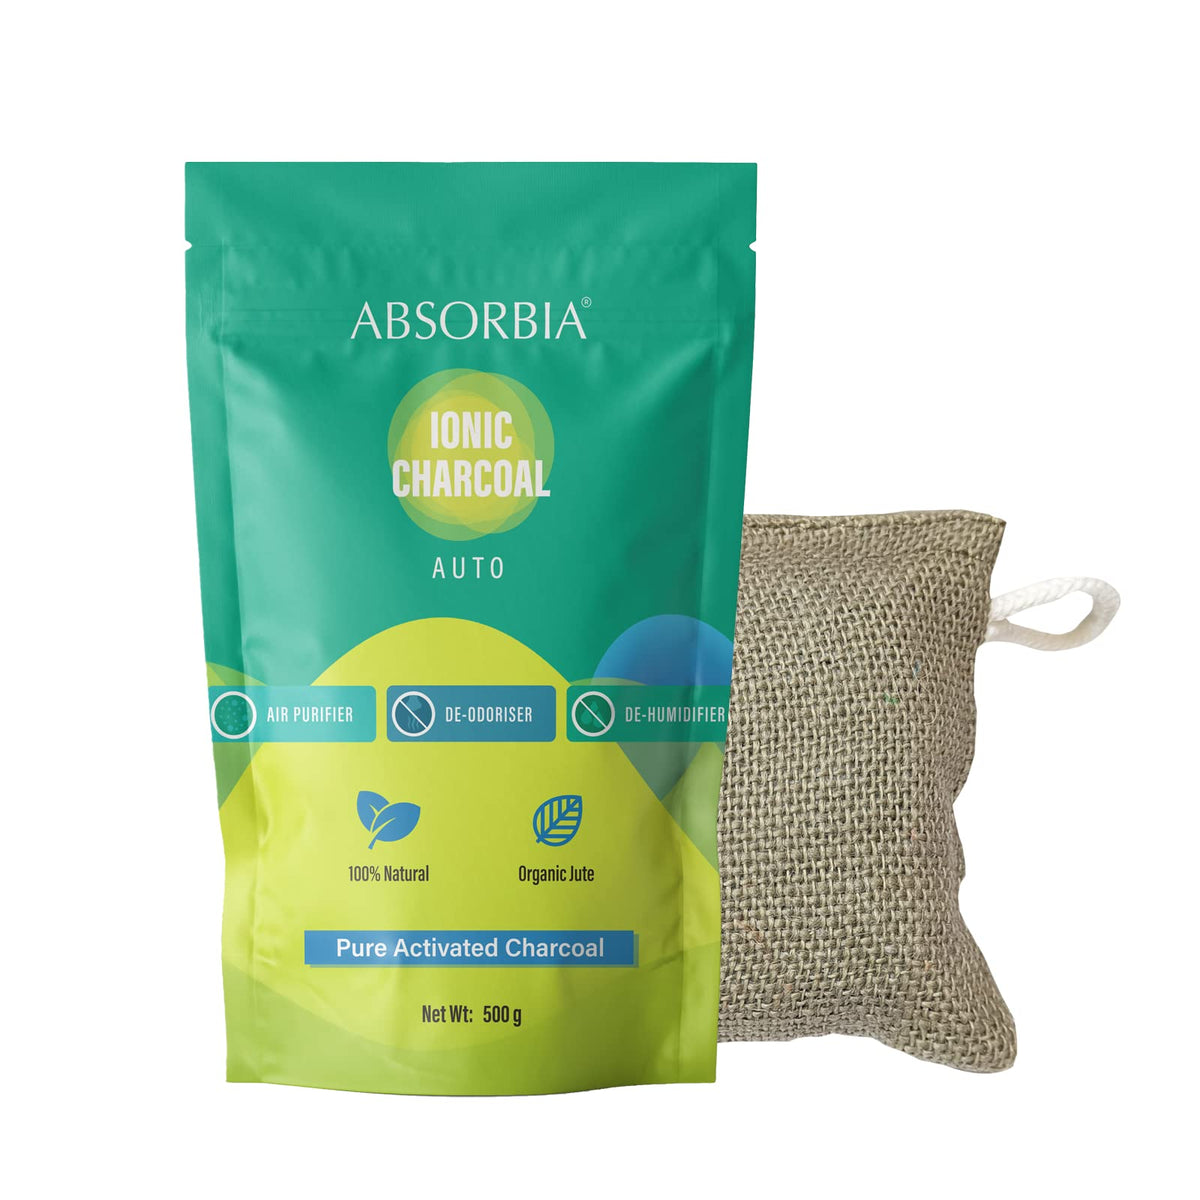 ABSORBIA IONIC AUTO Pure Activated Charcoal Air Purifier bag, made with Organic Jute | Natural Deodorizer and Dehumidifier for Car Rooms Fridge Shoes etc | 500 Gms